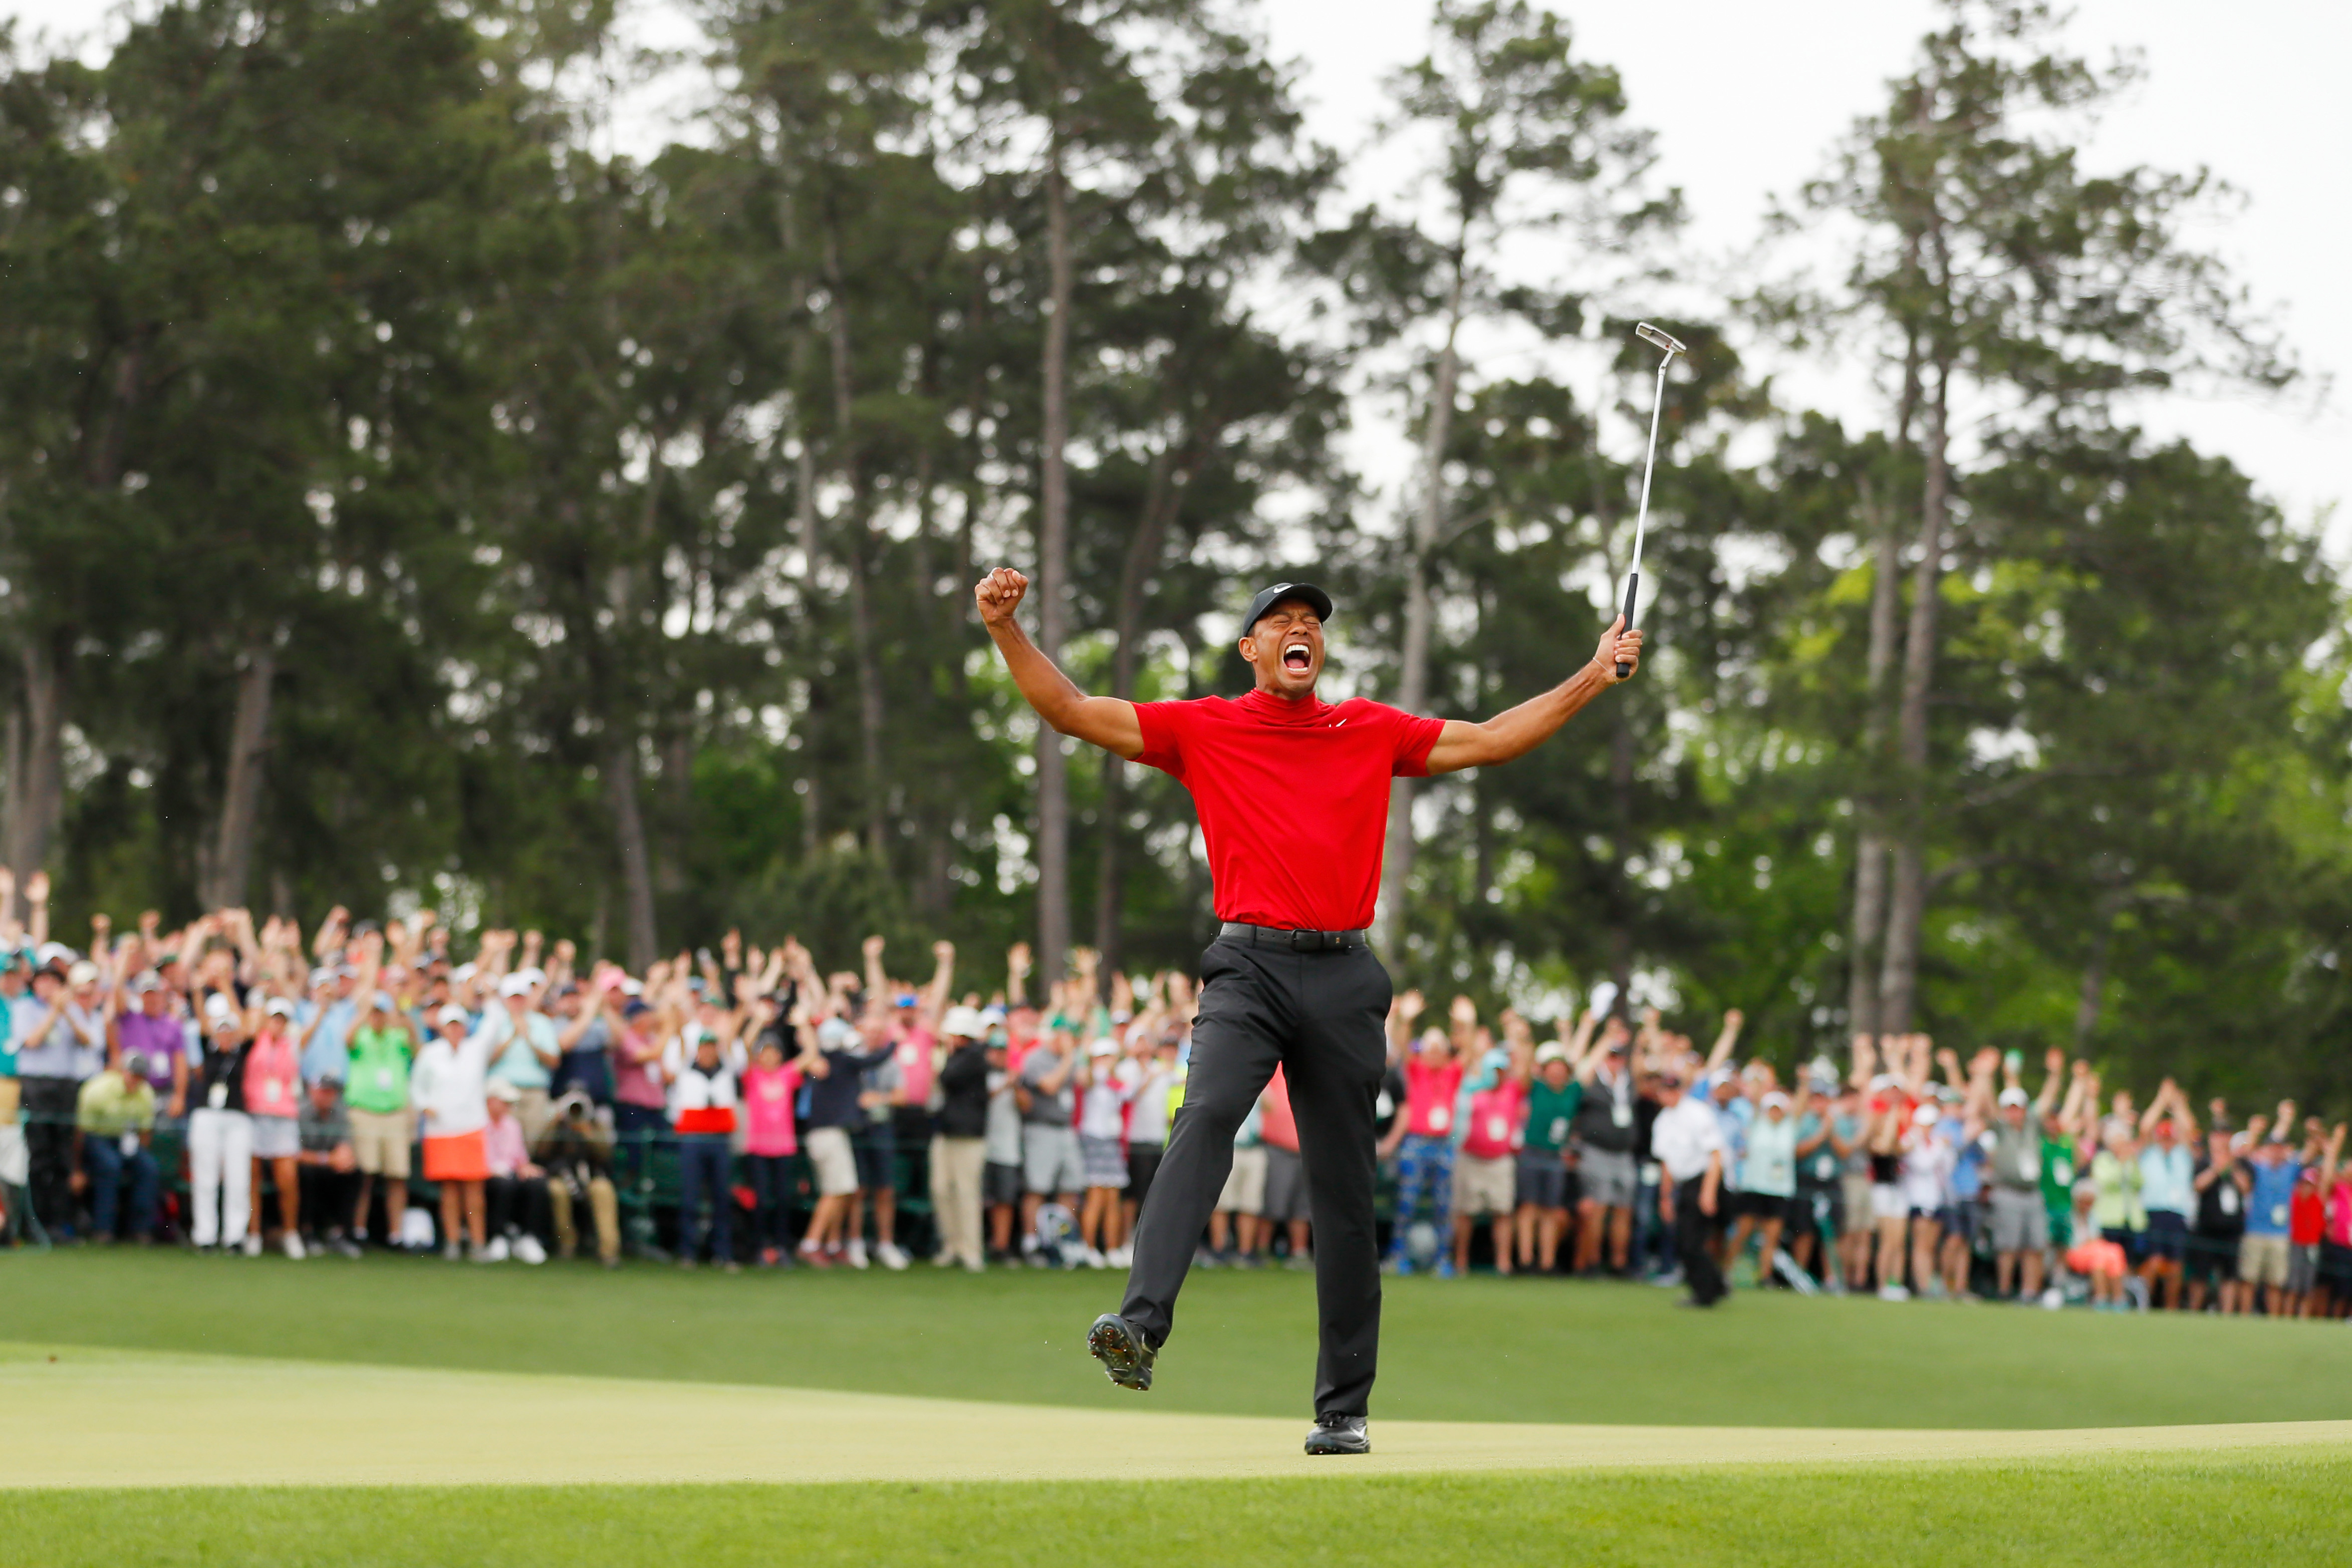 Tiger Woods of the United States celebrates after making his putt on the 18th green to win the Masters at Augusta National Golf Club on April 14, 2019 in Augusta, Georgia. (Photo by Kevin C. Cox/Getty Images)